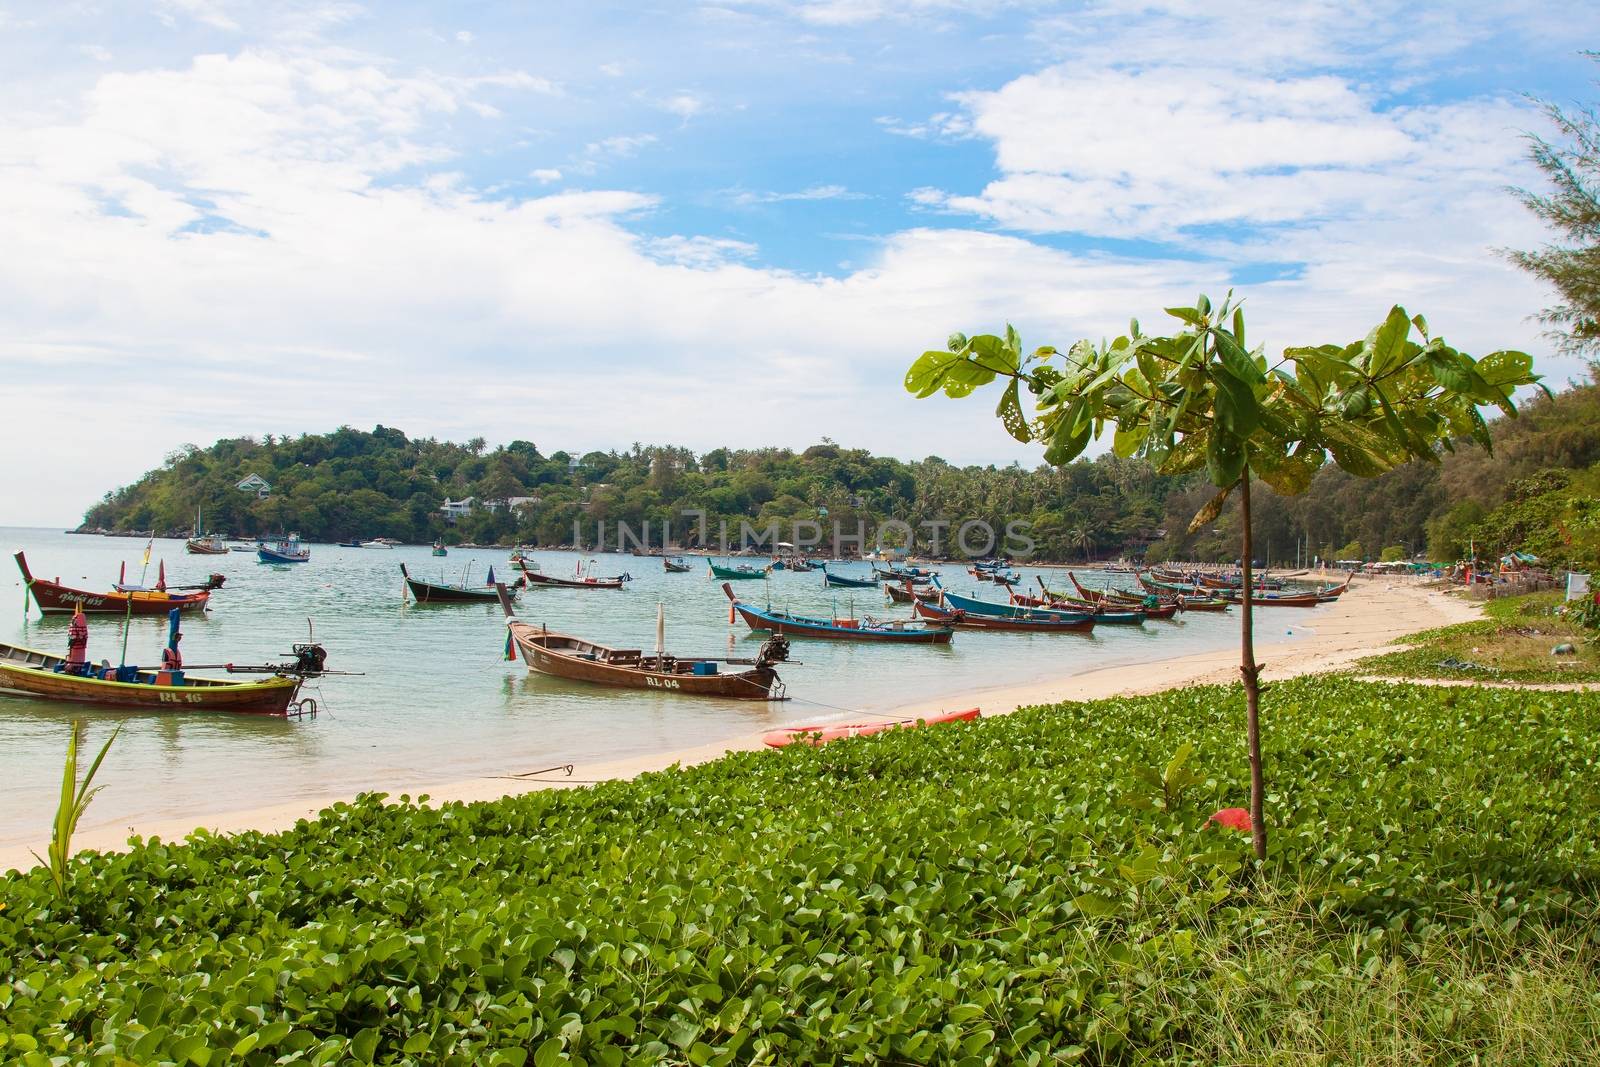 Phuket, Thailand - 20th december 2015: Beautiful landscape with Thai nature - blue sea with boats, grass and hills